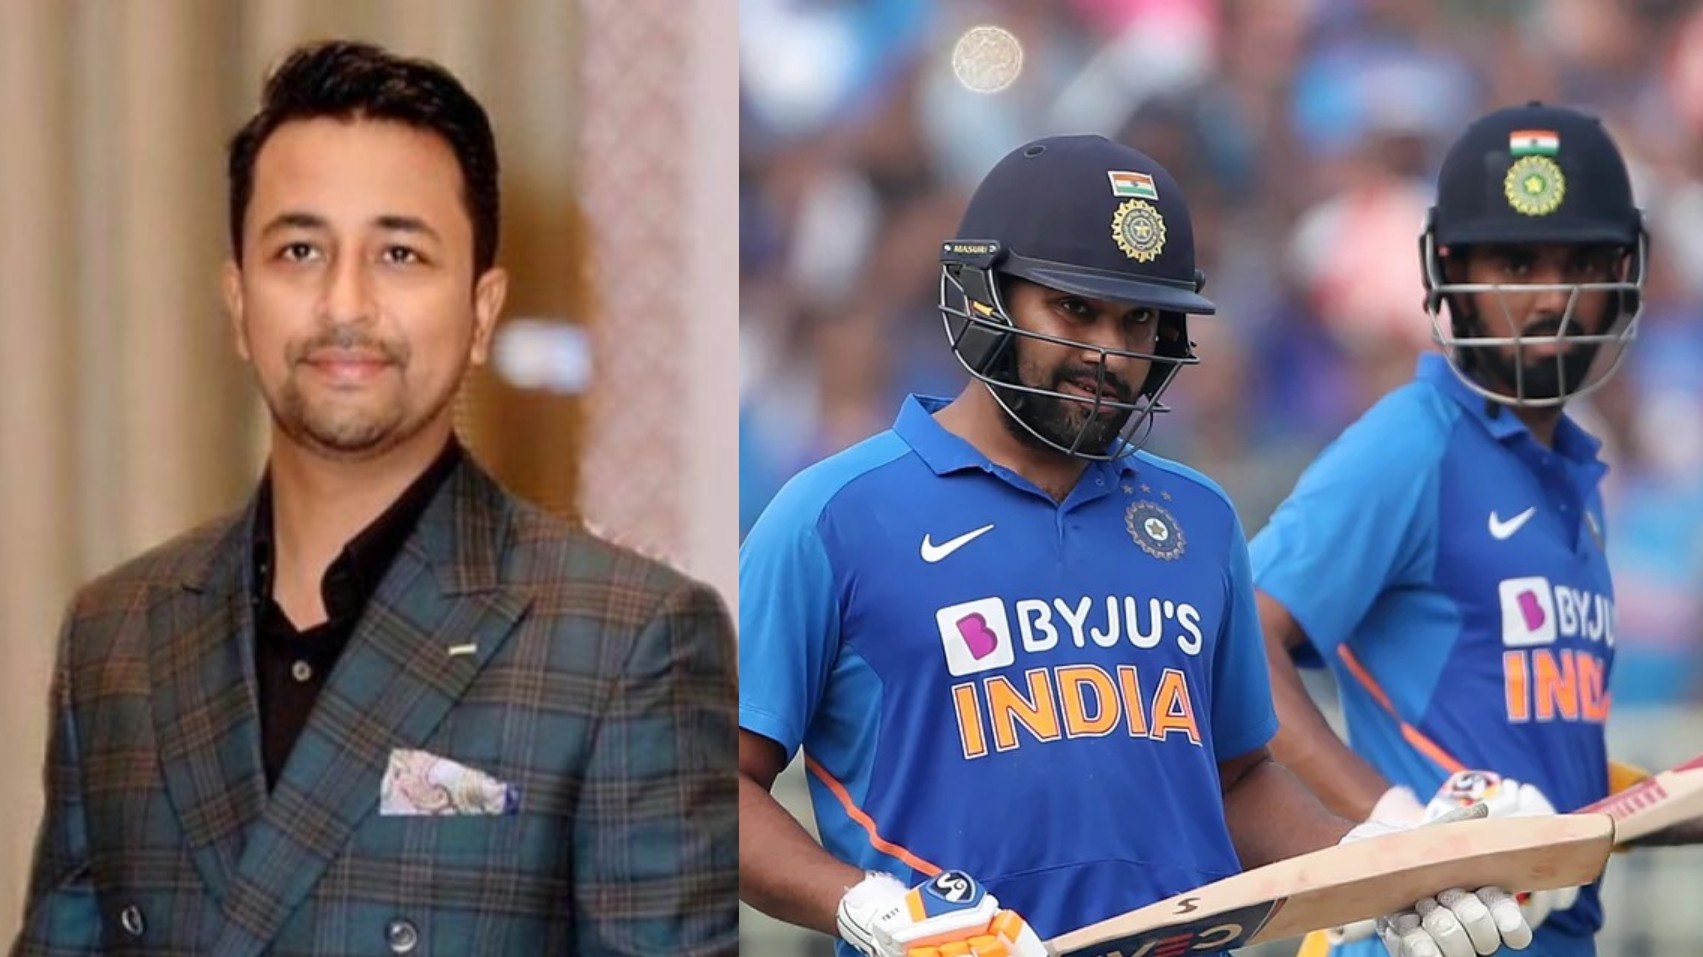 AUS v IND 2020-21: “Wouldn't it be confusing when Rohit makes Australia tour,” says Pragyan Ojha